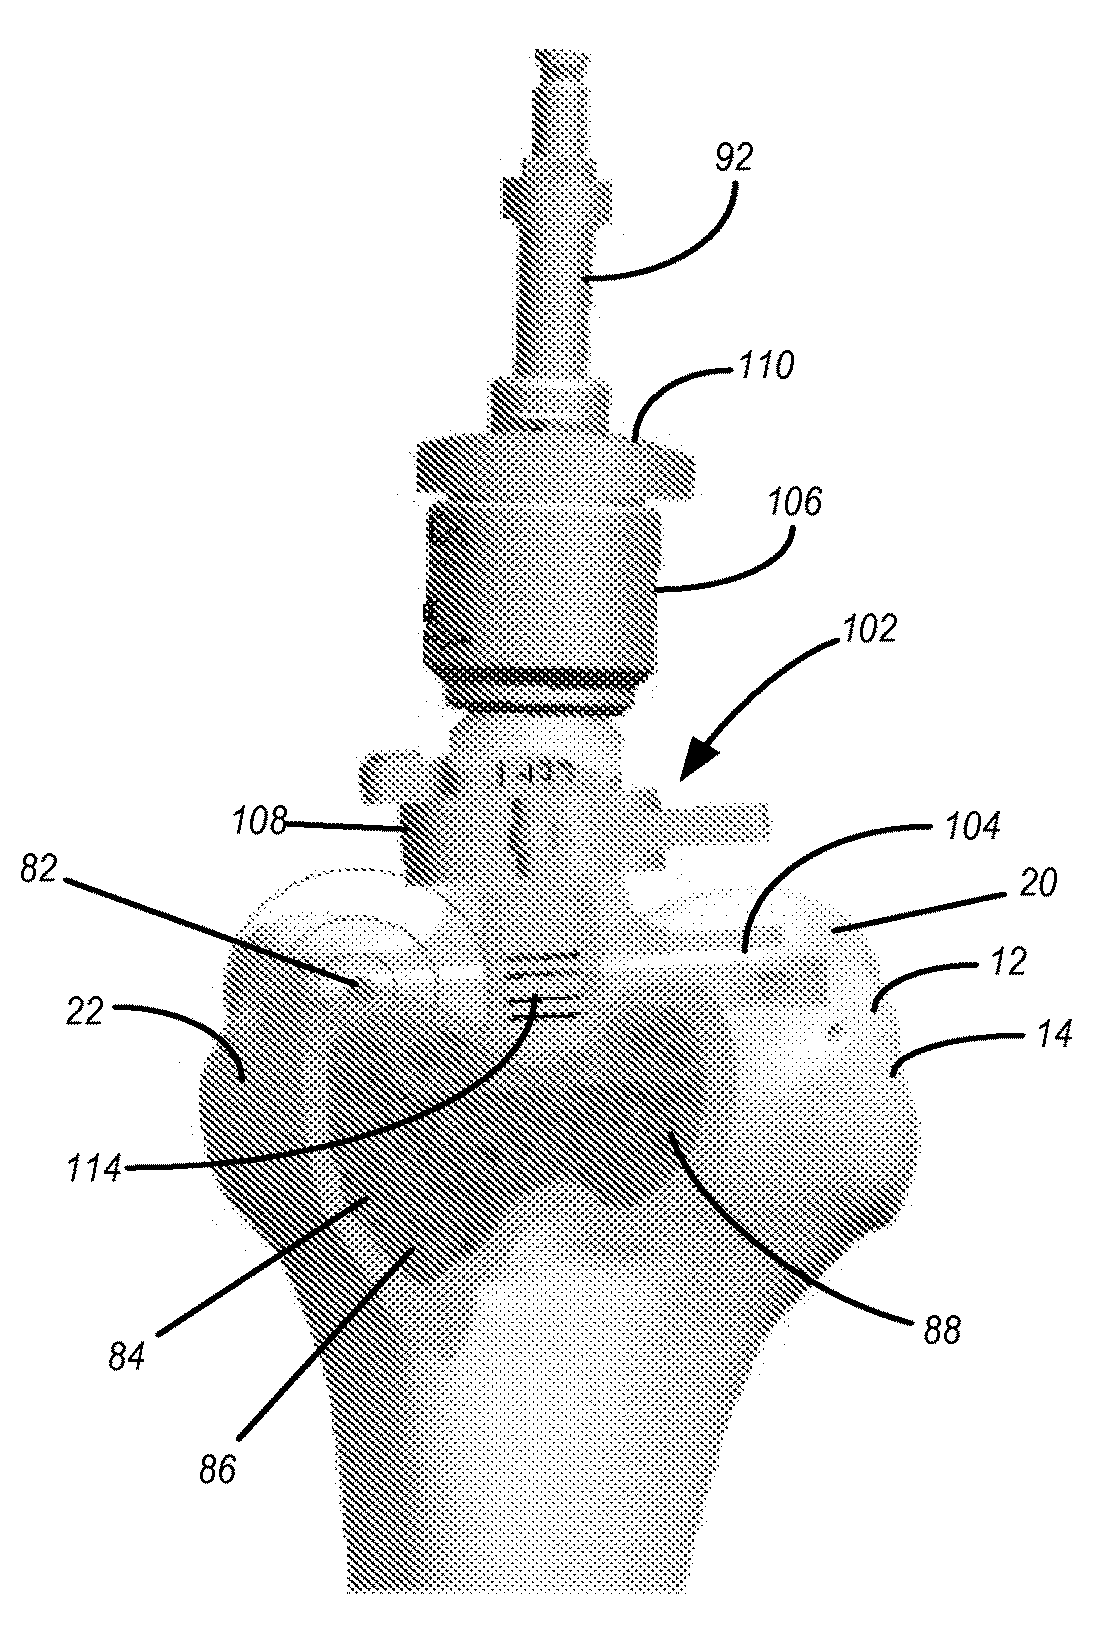 Implants with transition surfaces and related processes